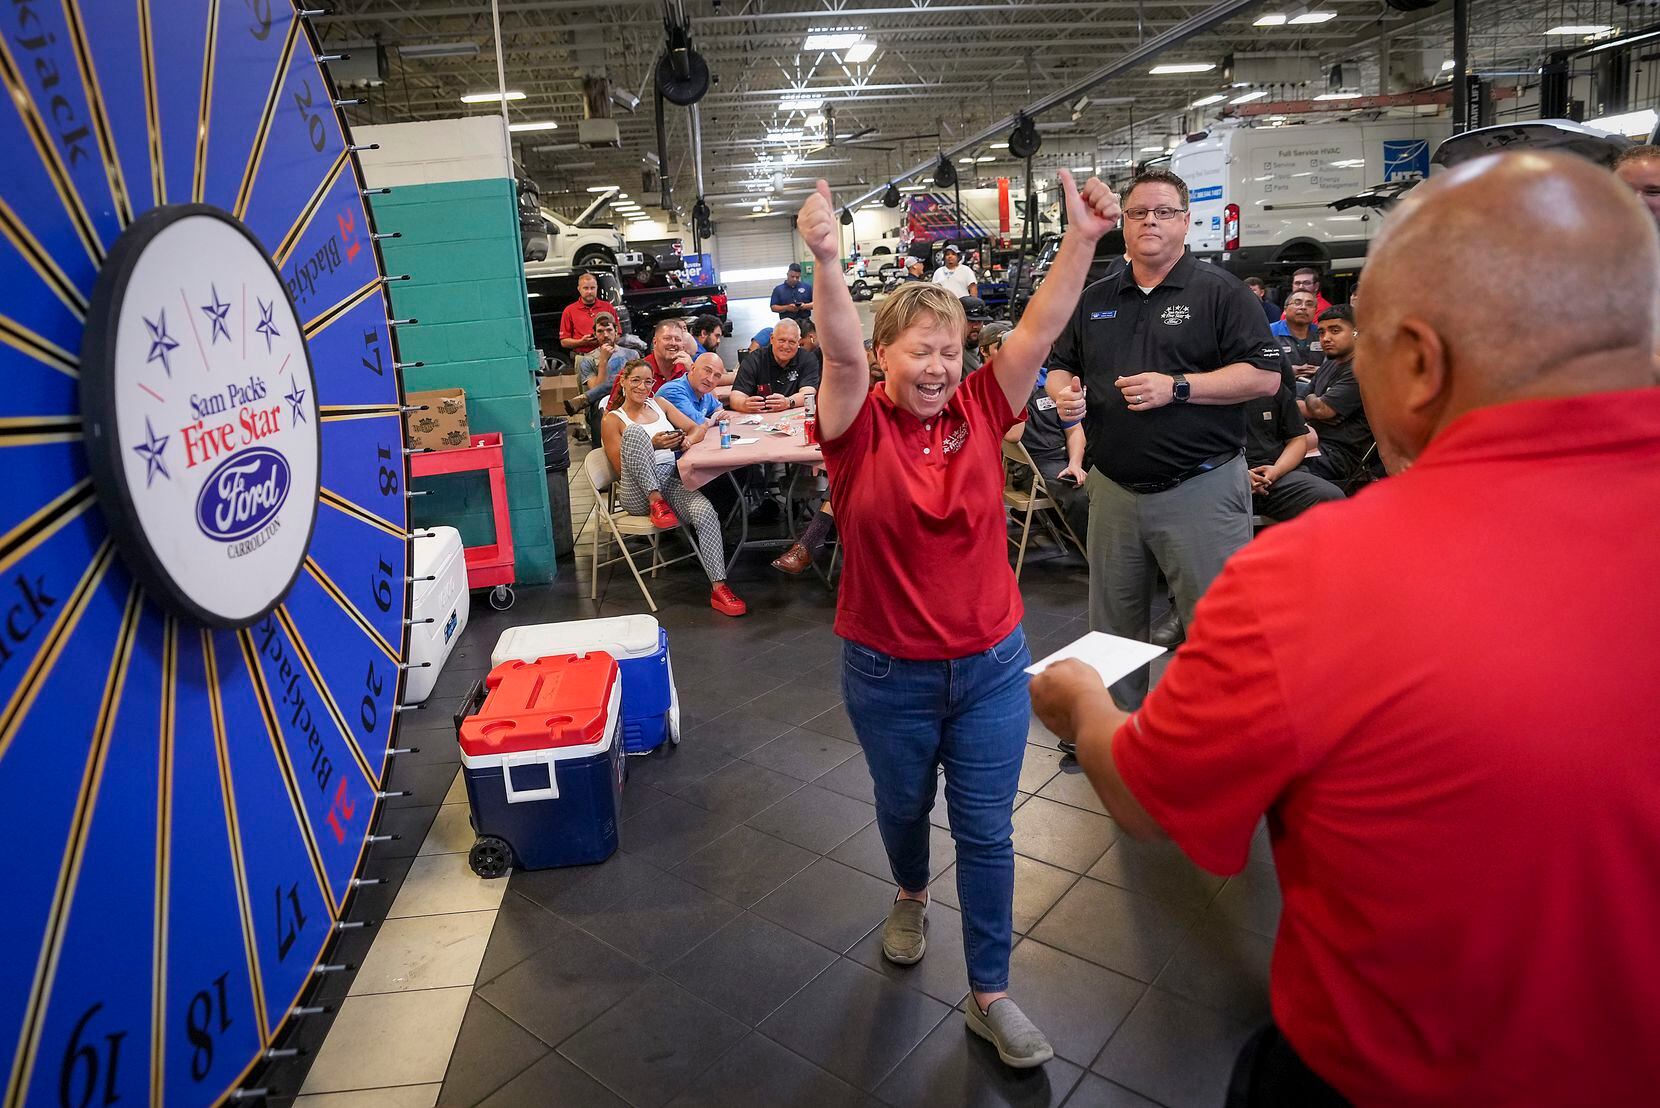 Jamie Cory celebrates after winning a cash prize with the spin of a wheel during a shop...